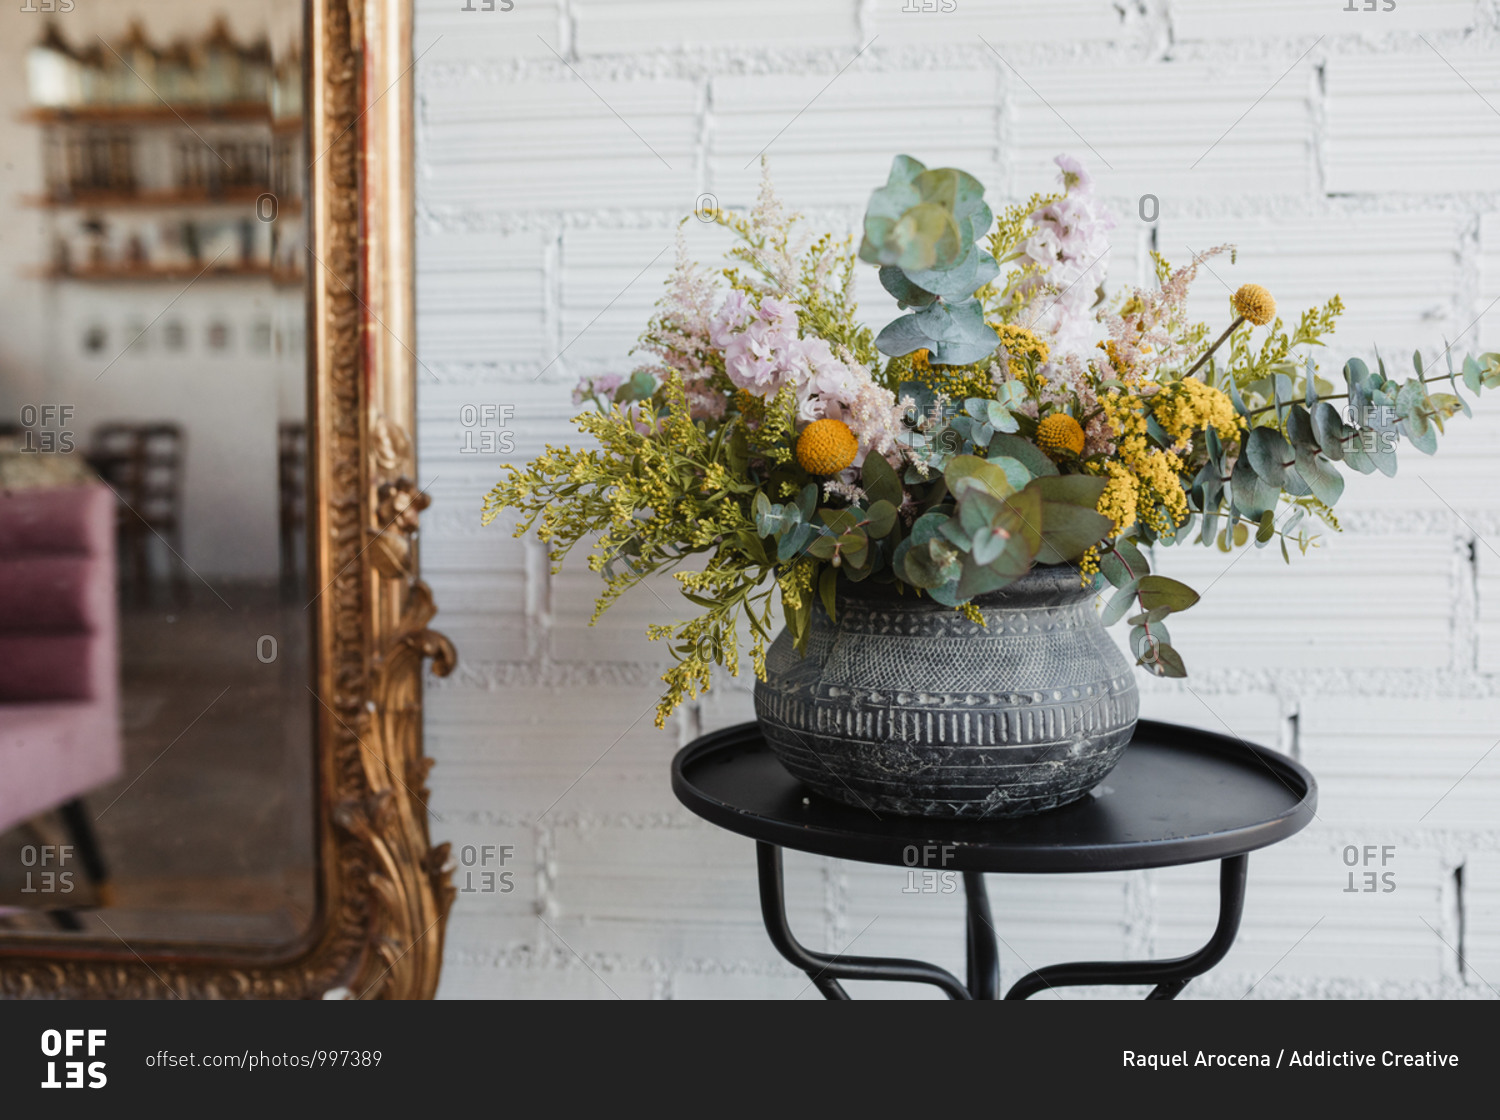 Beautiful bouquet with various flowers including goldenrod and craspedia flowers with green eucalyptus branches arranged in ornamental ceramic pot placed on small table against white brick wall with mirror in creative floristry studio